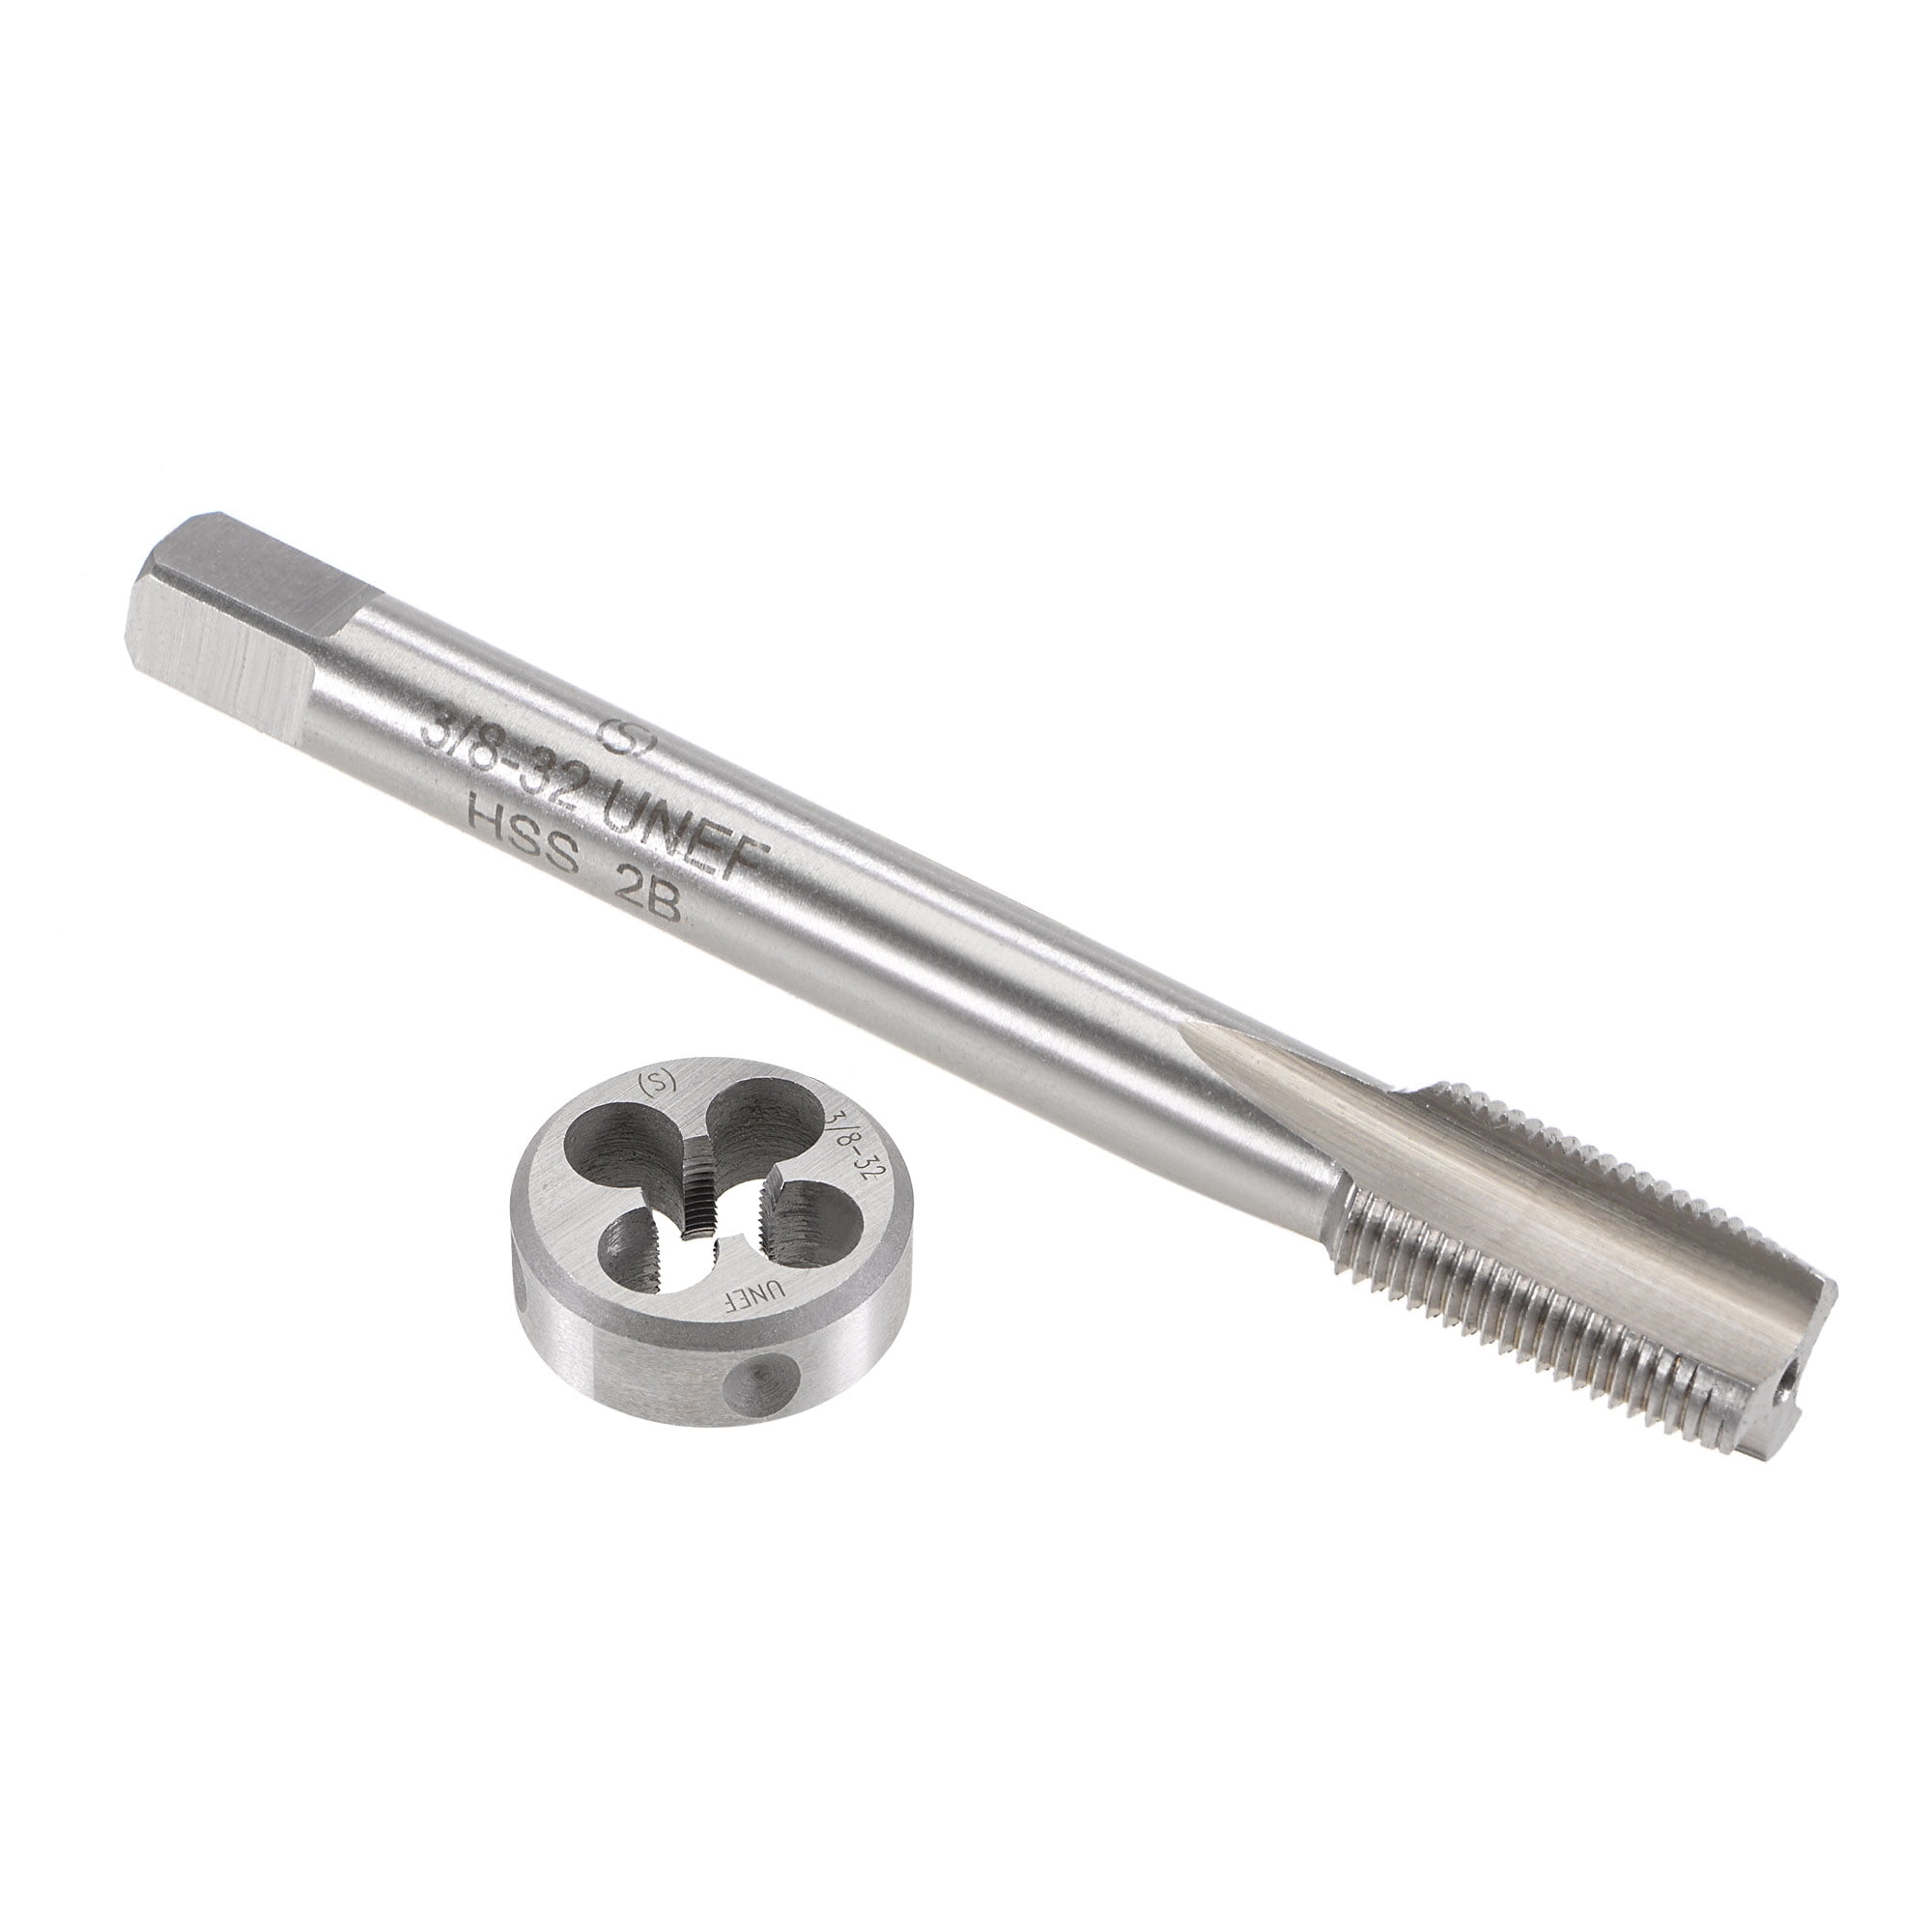 2Pcs M8 x 0.5mm HSS Metric Tap And Die Set Thread Tap And Round Thread Die Right Hand HSS Taper Silver Tone 